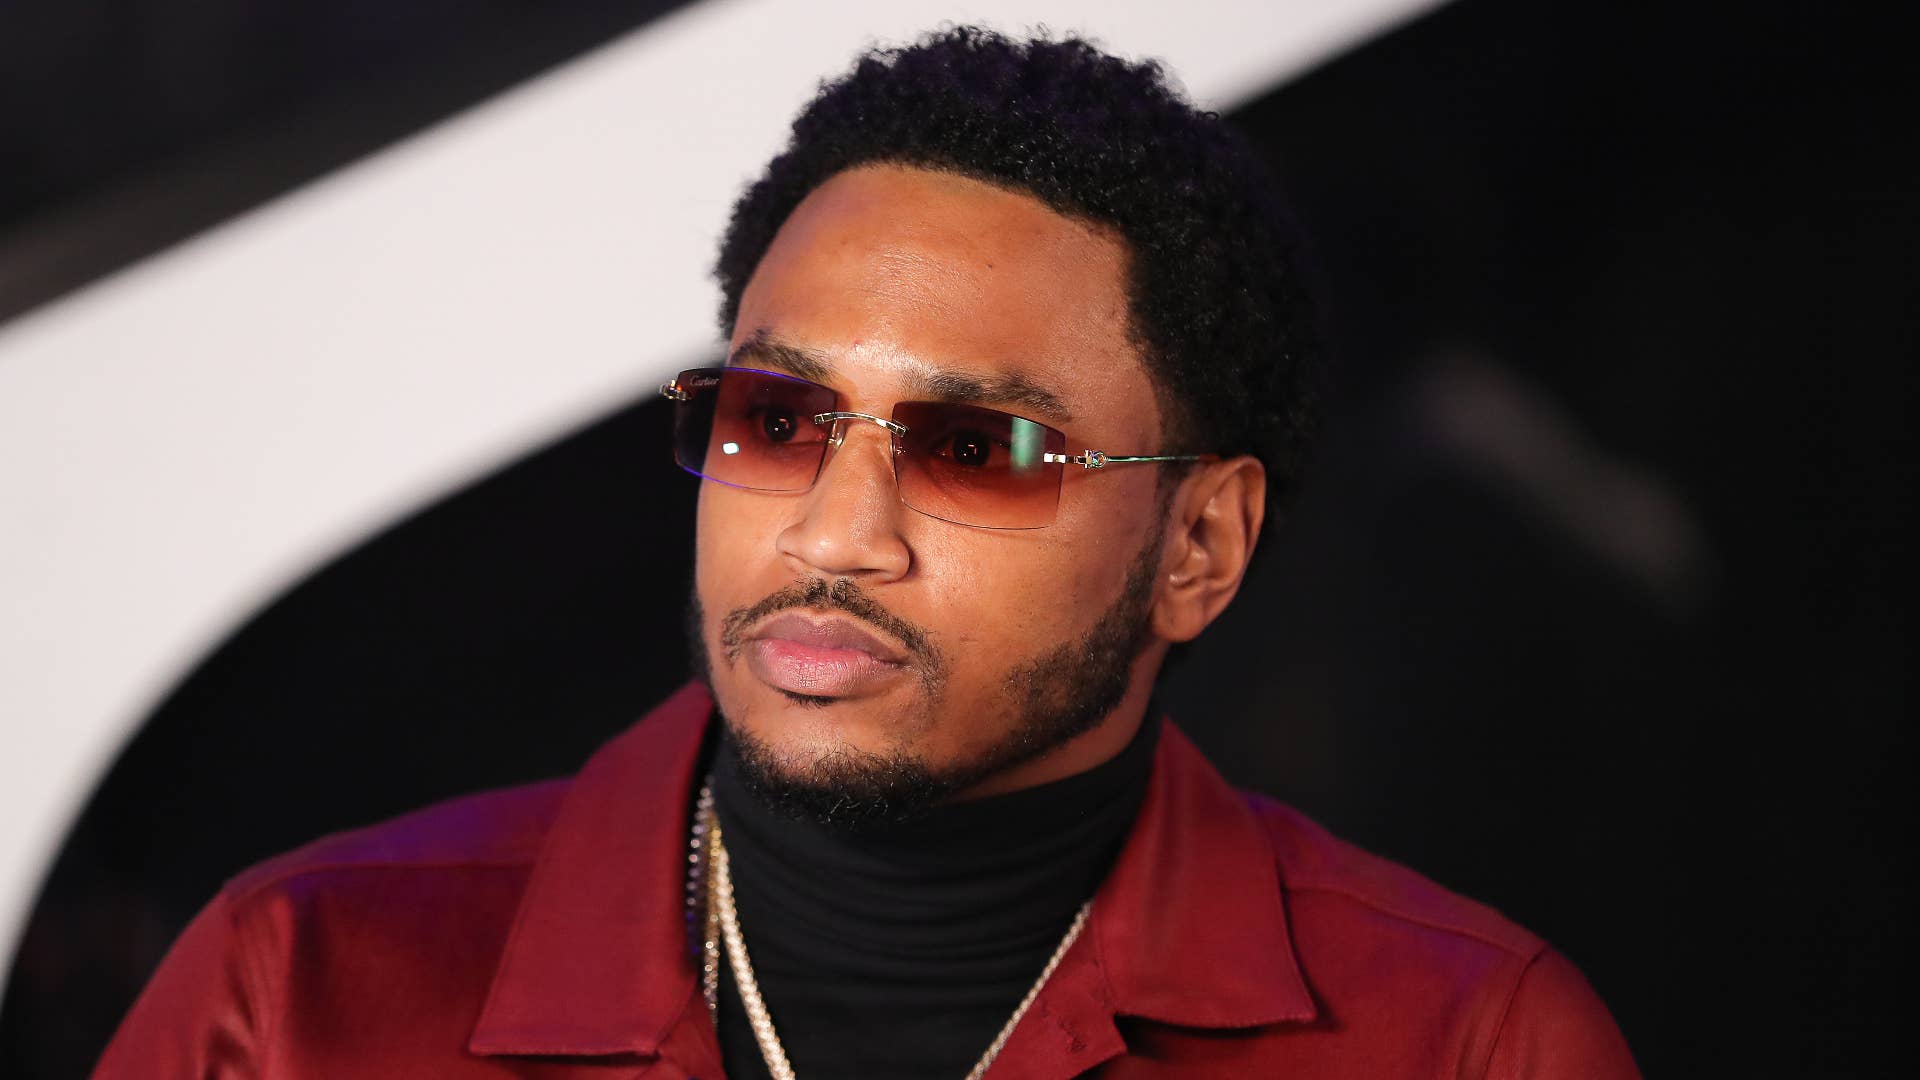 Trey Songz photographed during virtual concert event.